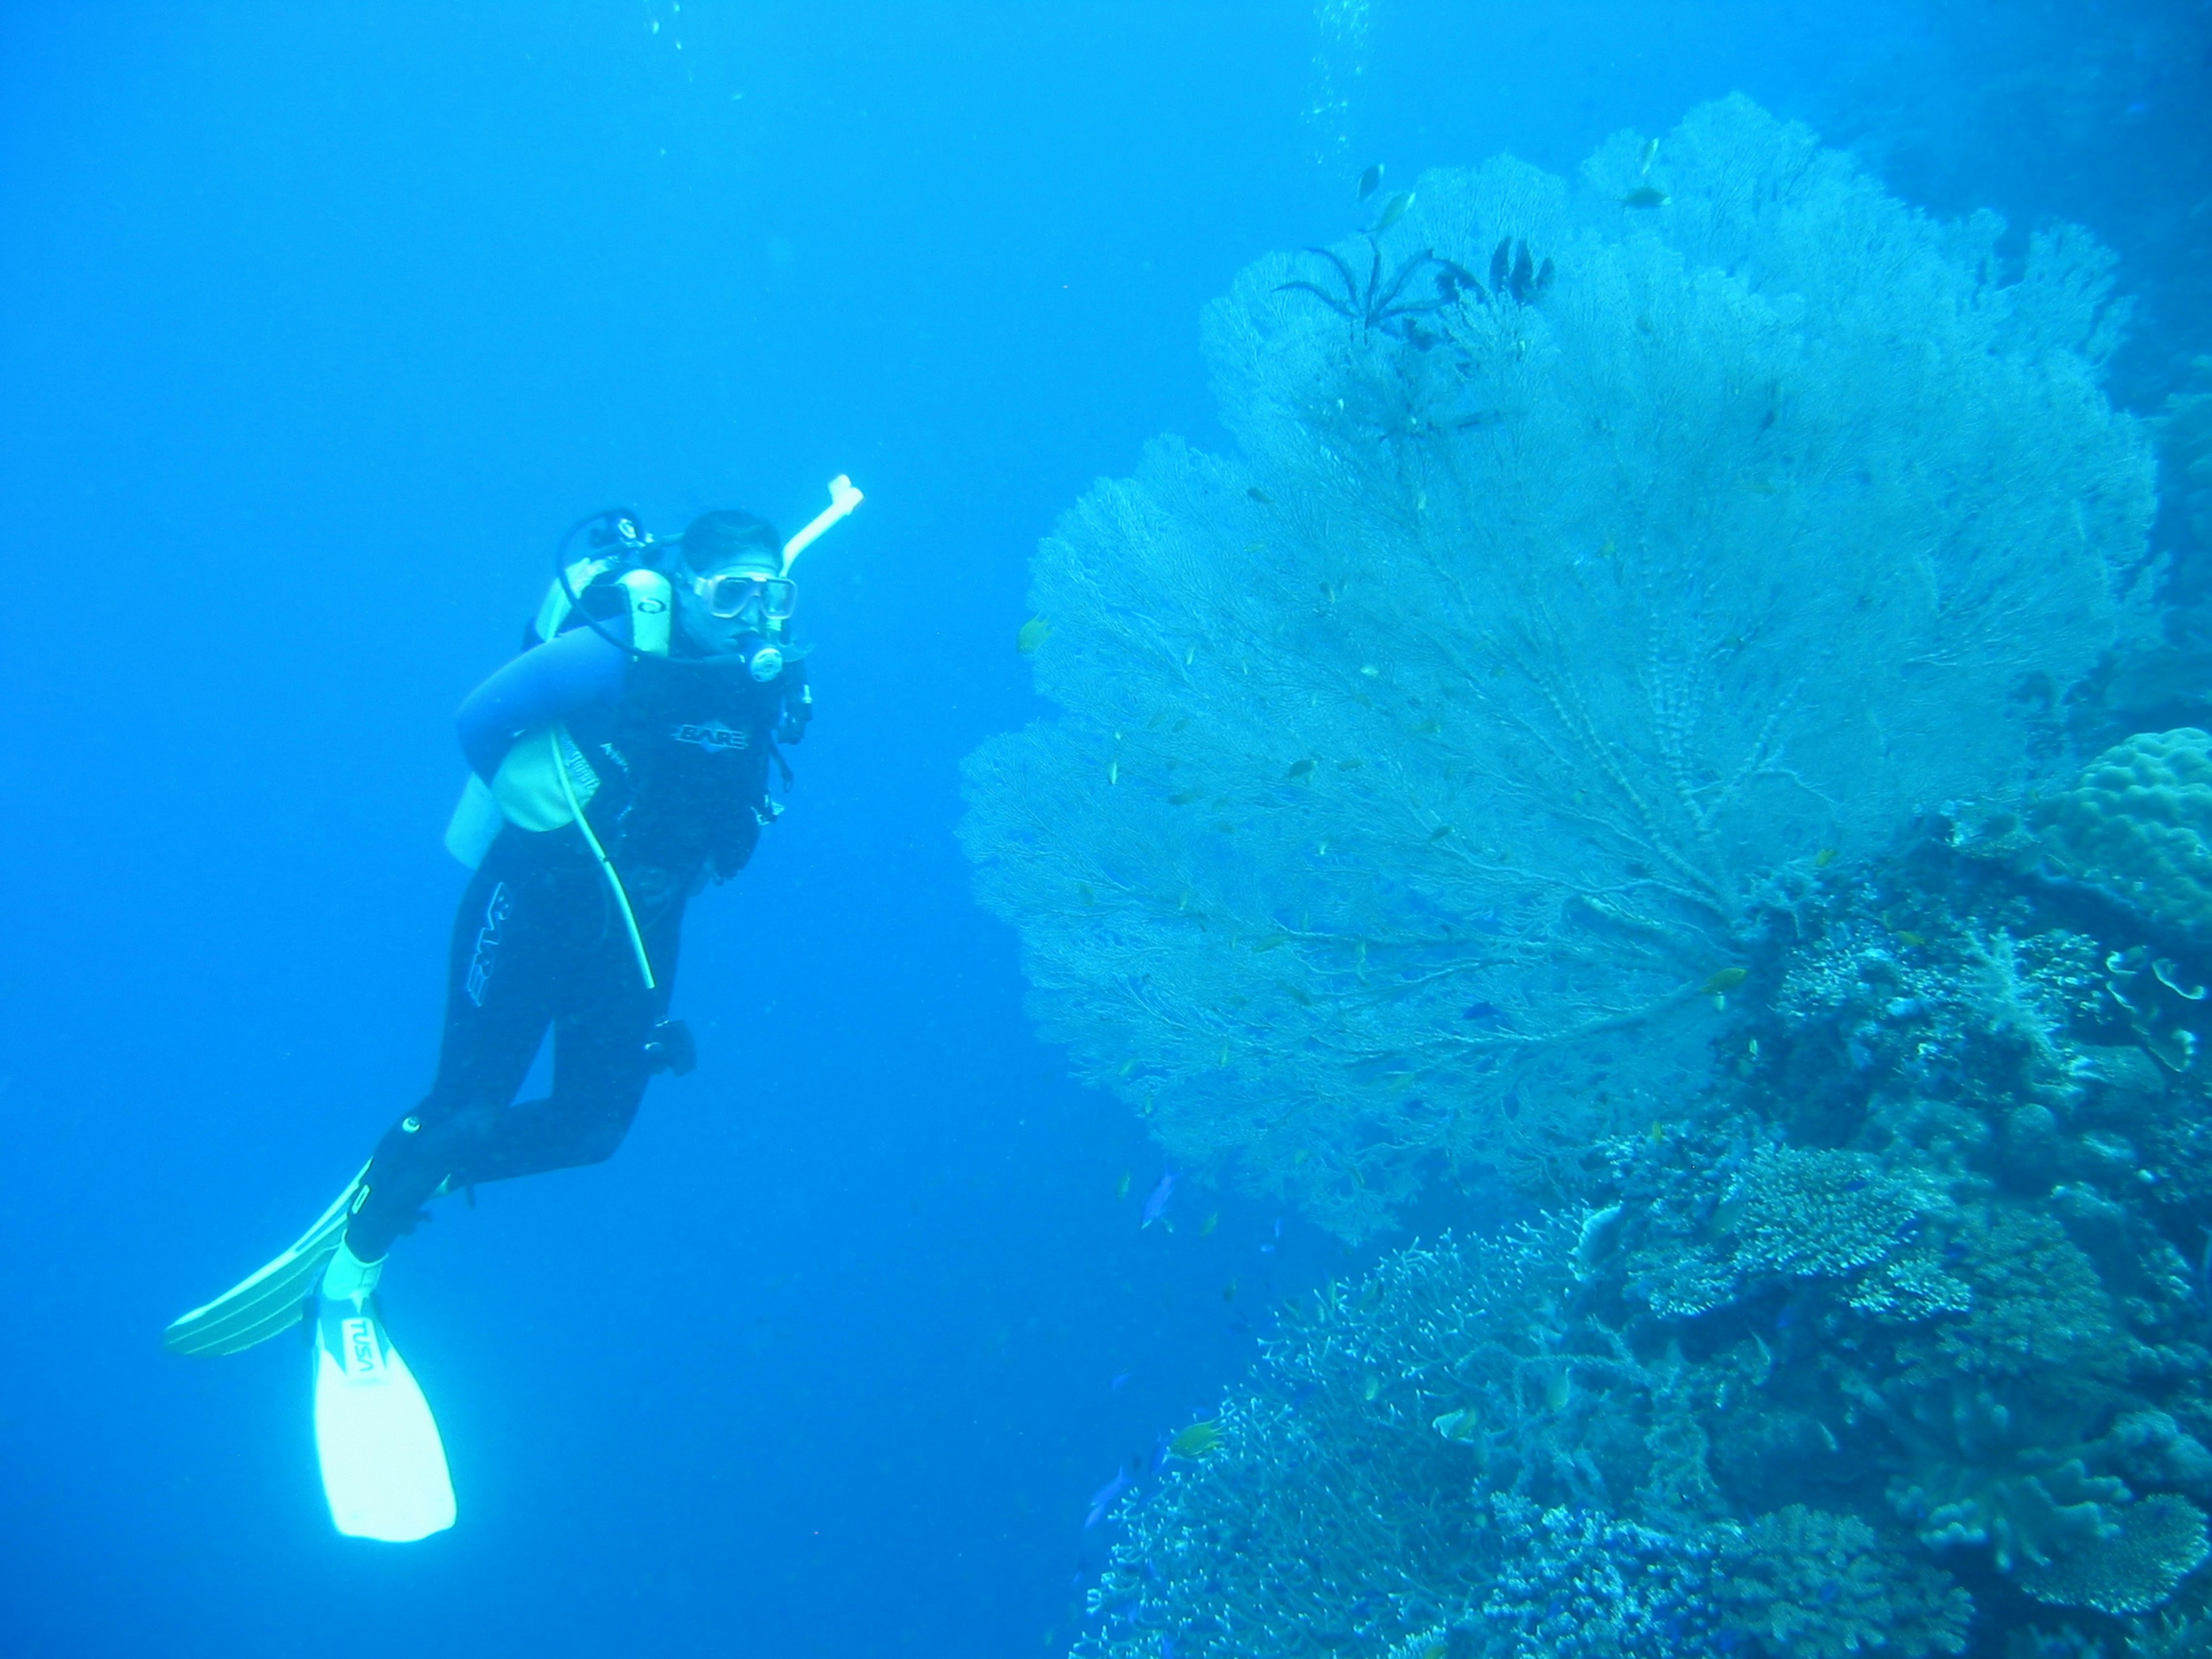 Dr. Vincent dives in damaged habitats to figure out what to do for species and spaces that are at risk.